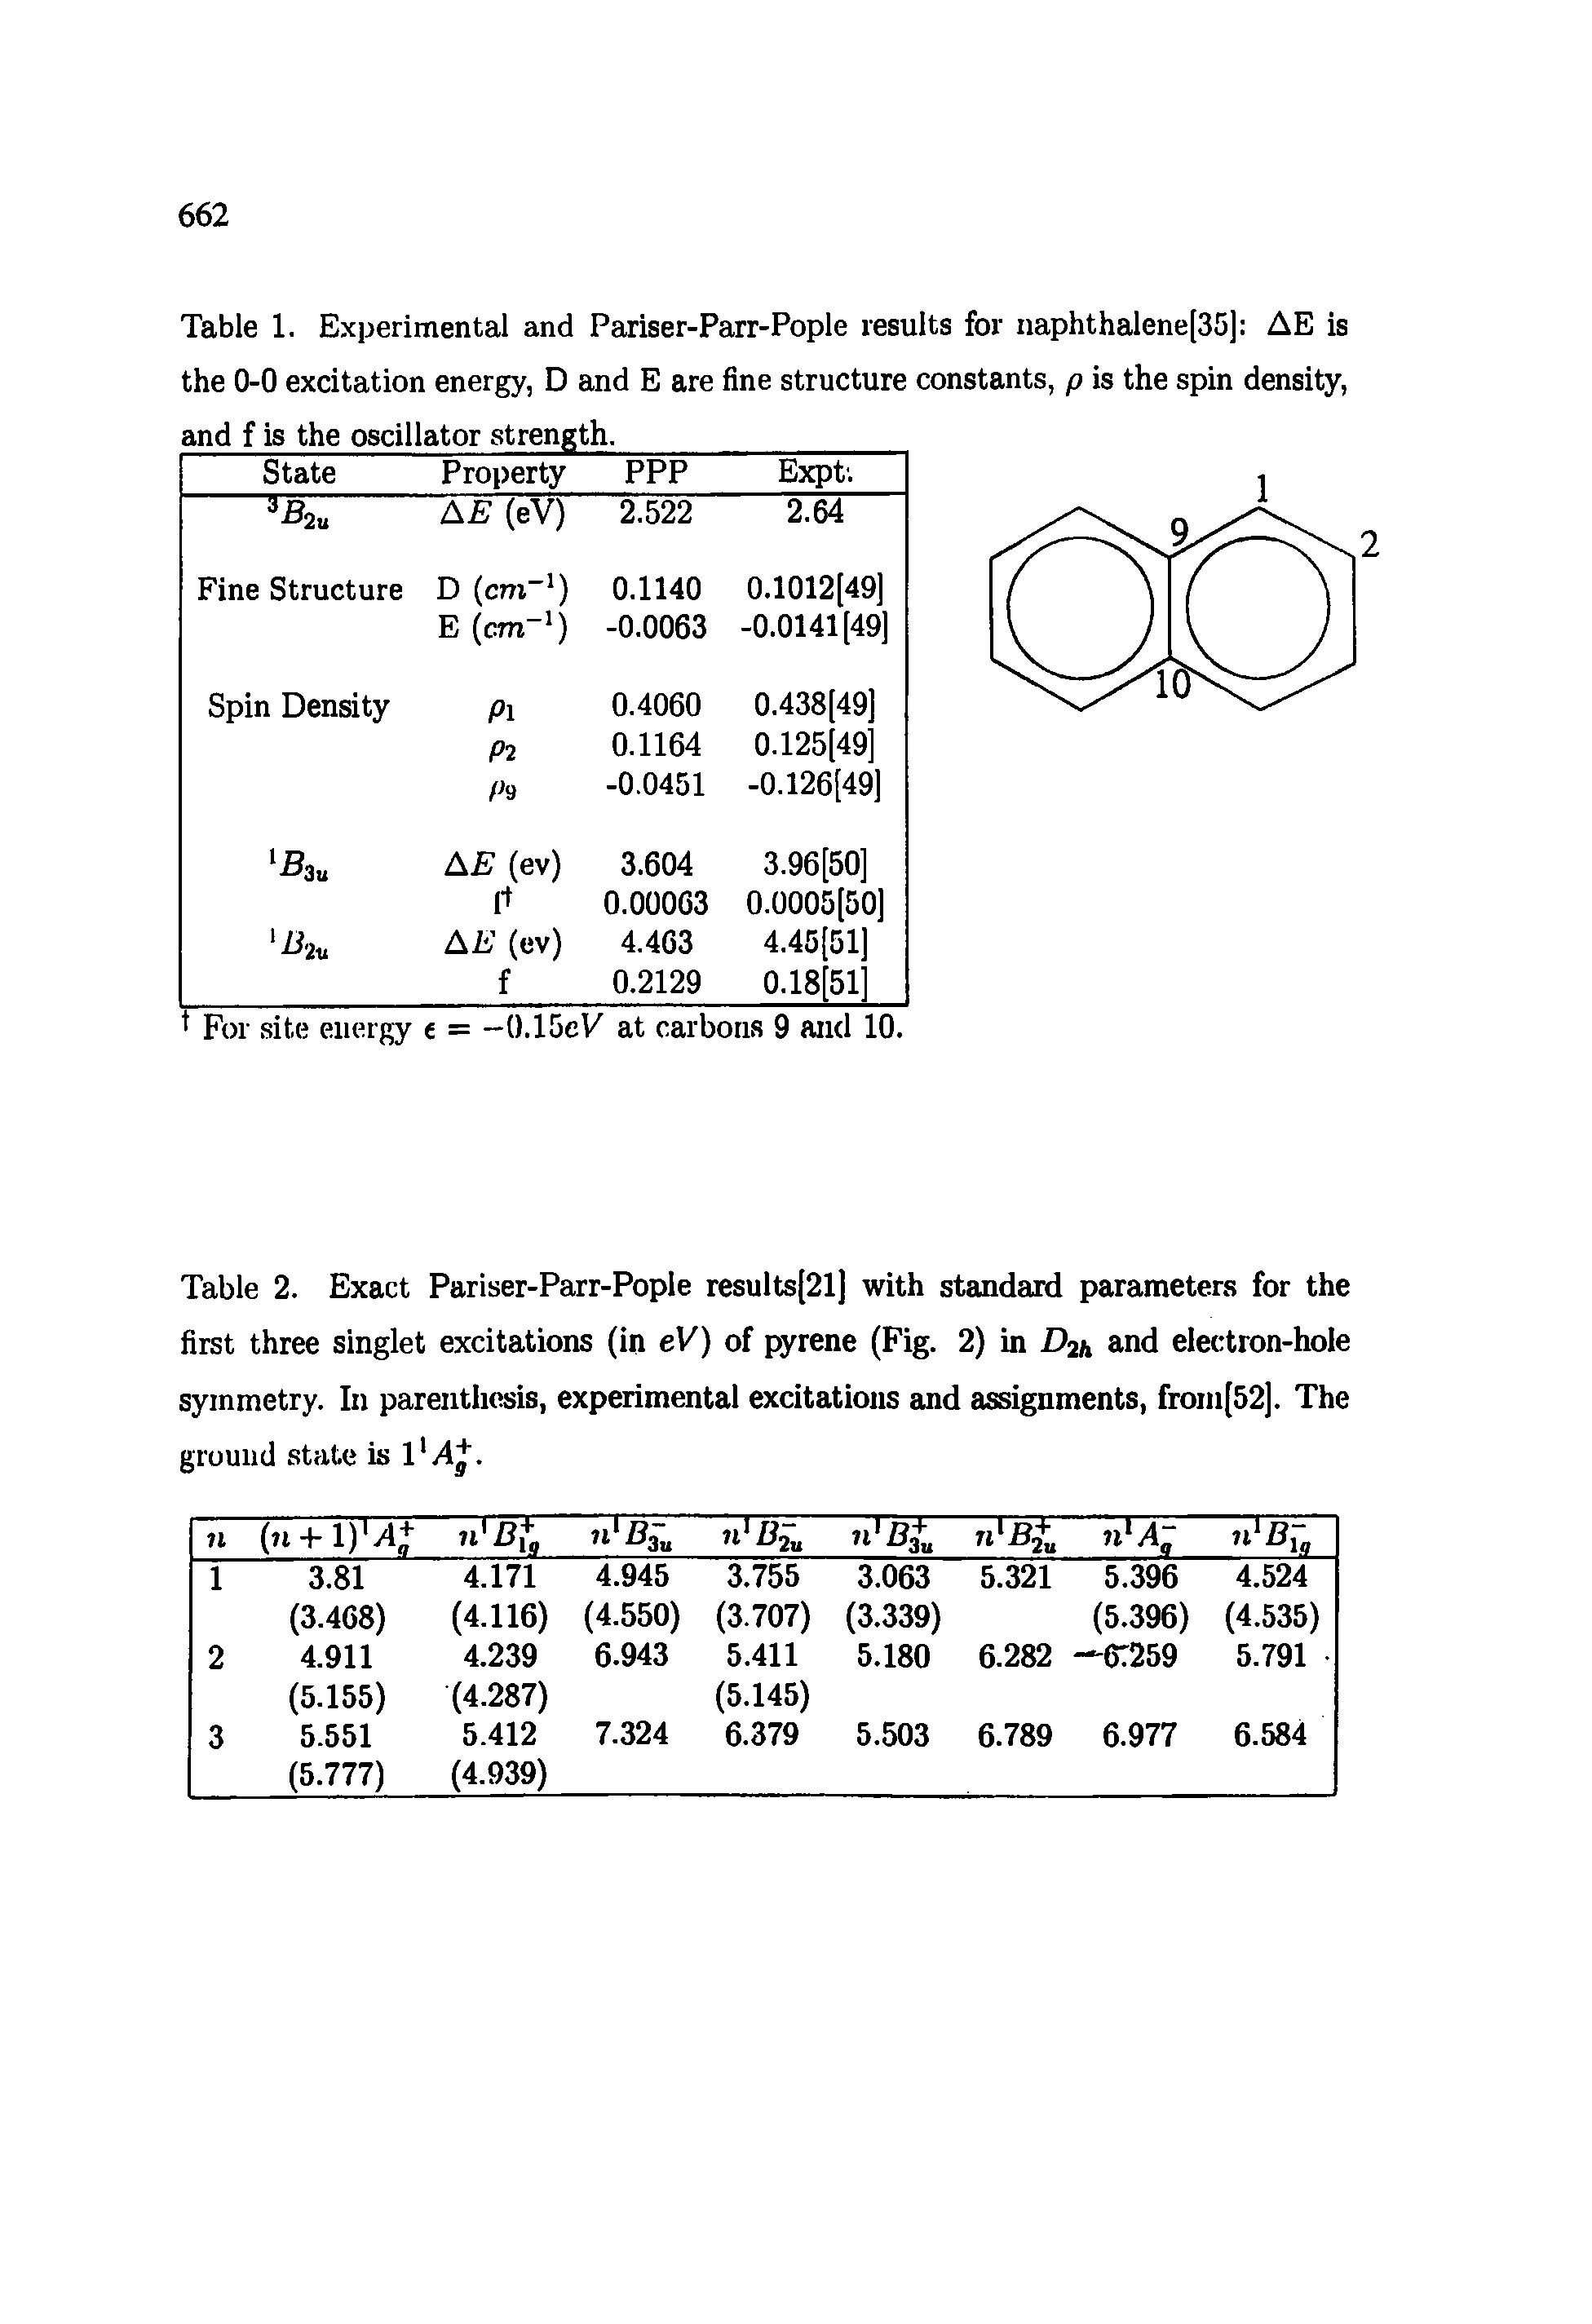 Table 2. Exact Pariser-Parr-Pople results[21] with standard parameters for the first three singlet excitations (in eV) of pyrene (Fig. 2) in >2a and electron-hole symmetry. In parenthesis, experimental excitations and assignments, from[52]. The...